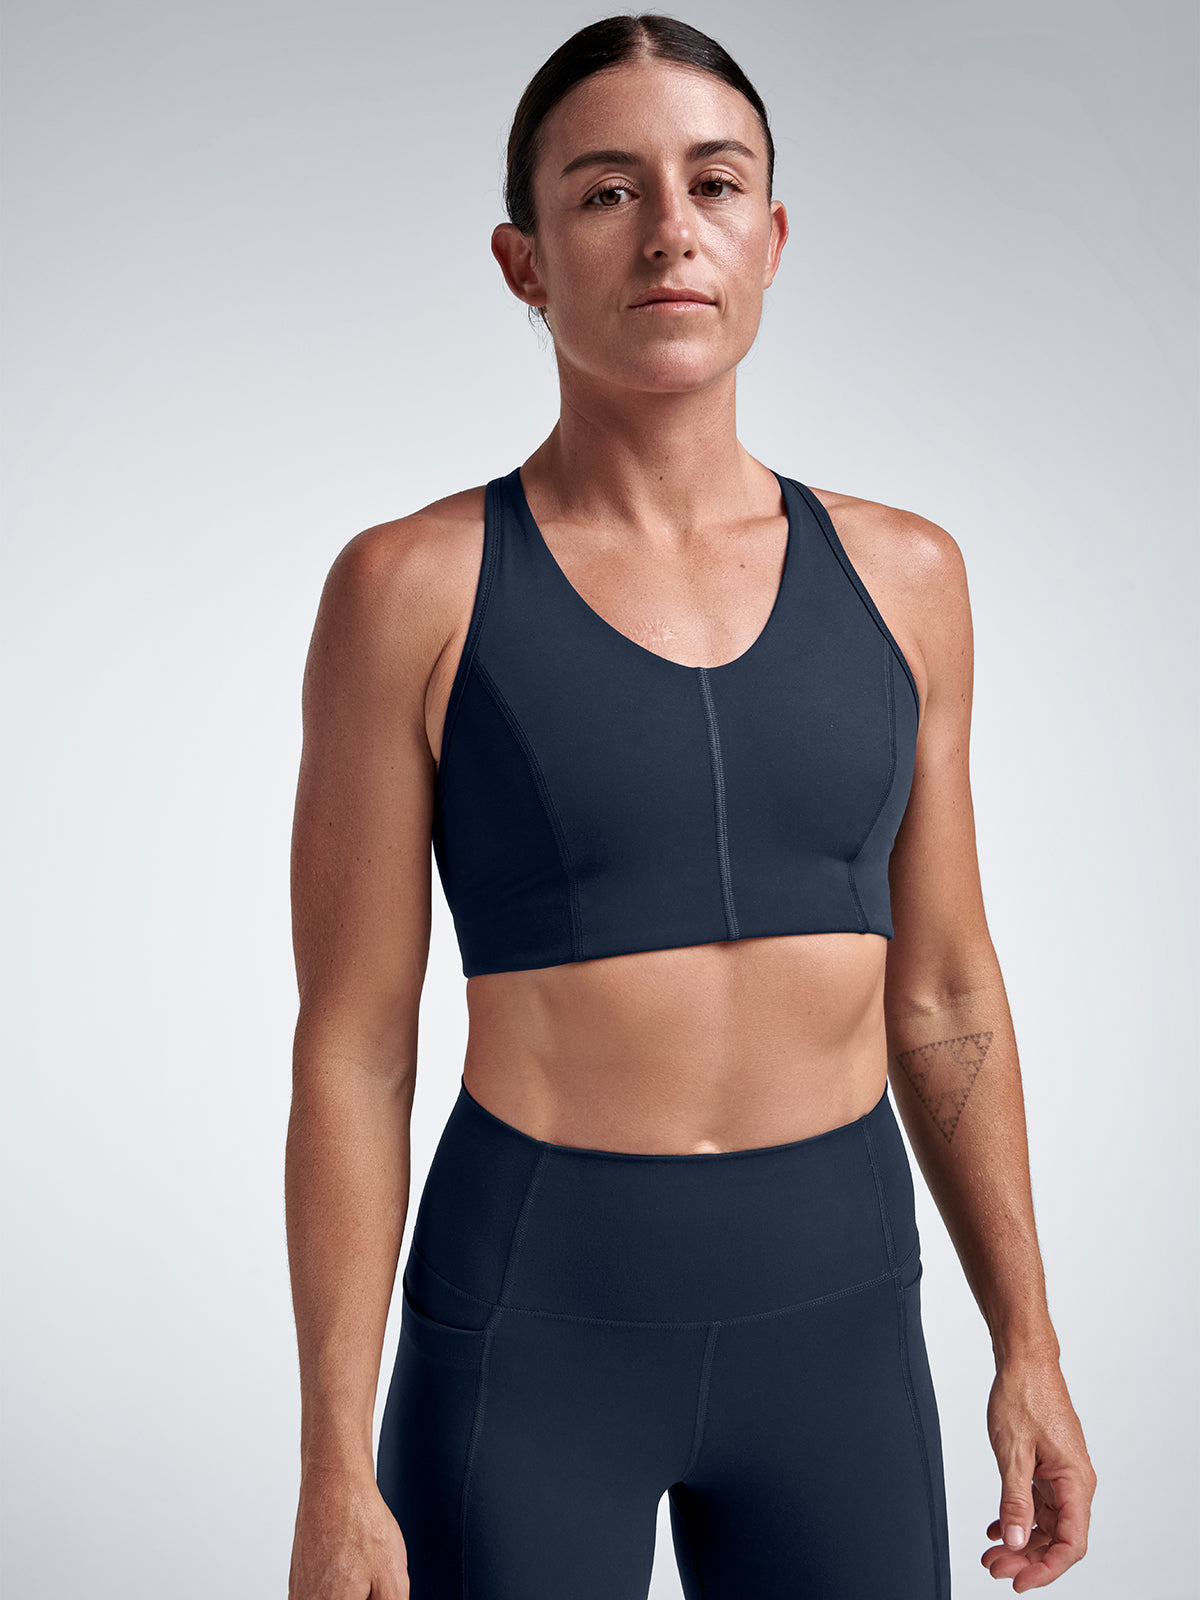 LOVE my In Movement 25 in Dark Olive. WHY ARE THEY DISCONTINUING THIS  STYLE?? : r/lululemon